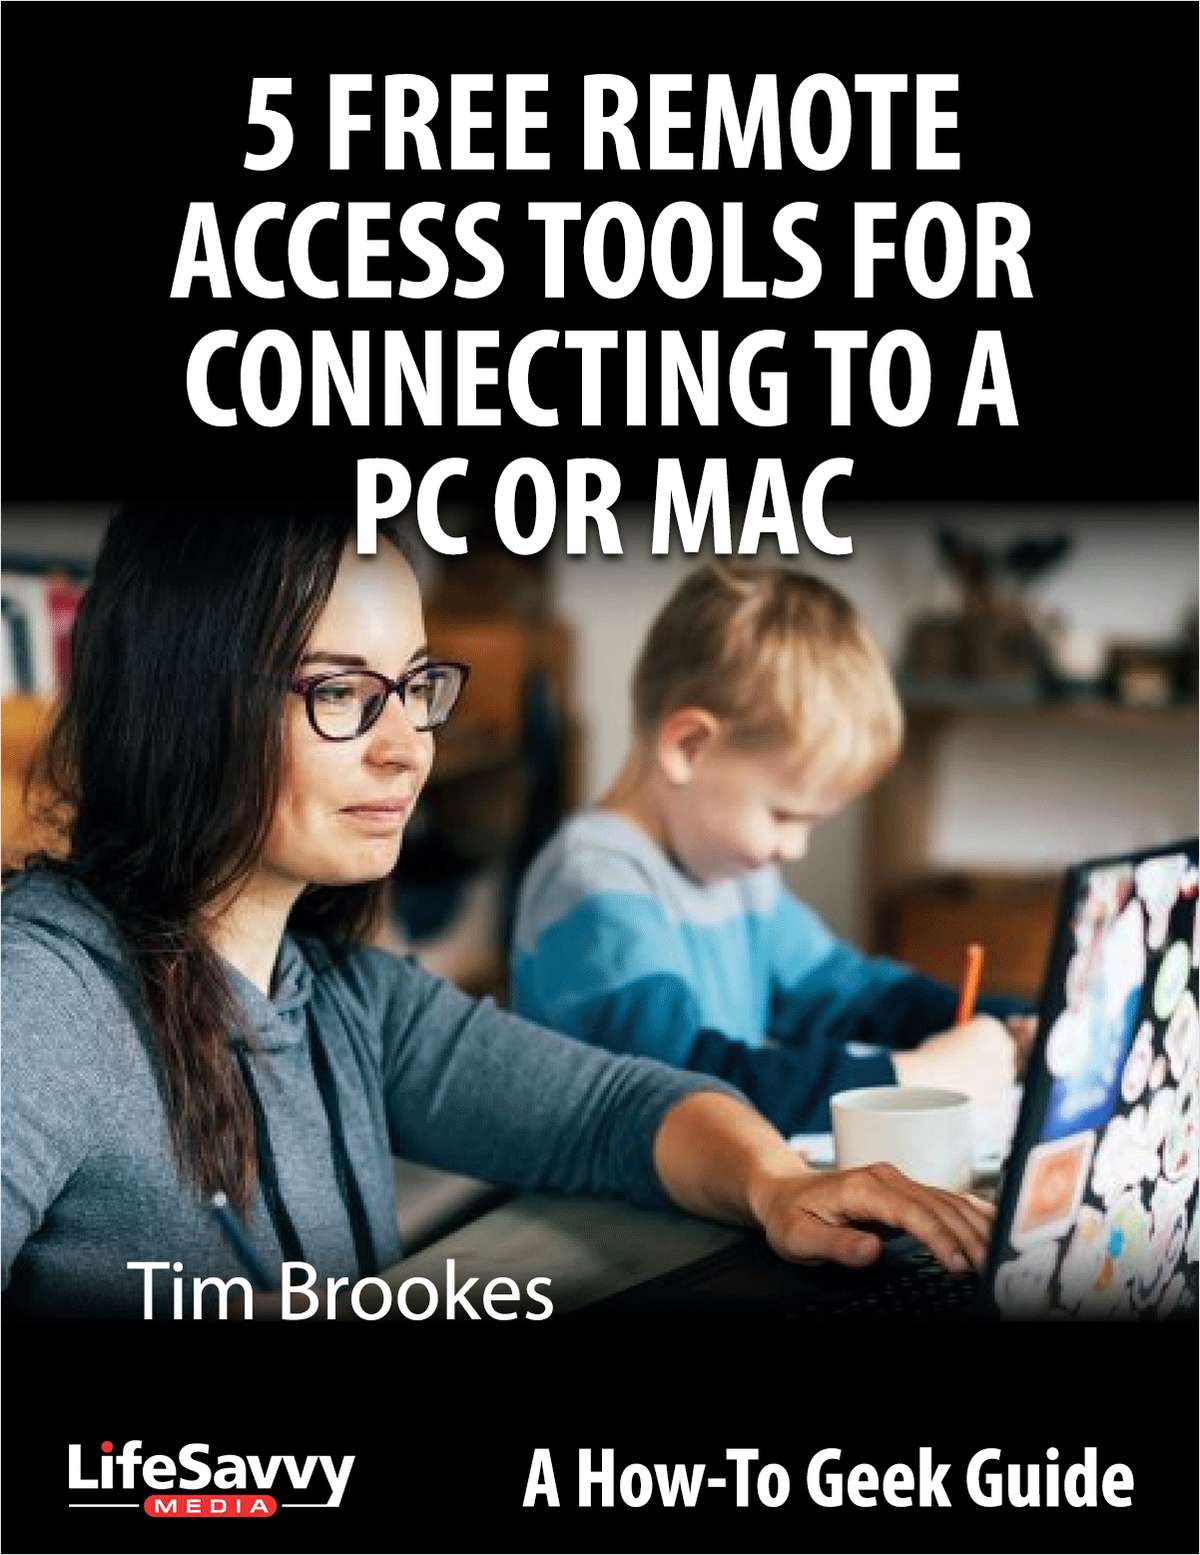 5 Free Remote Access Tools for Connecting to a PC or Mac